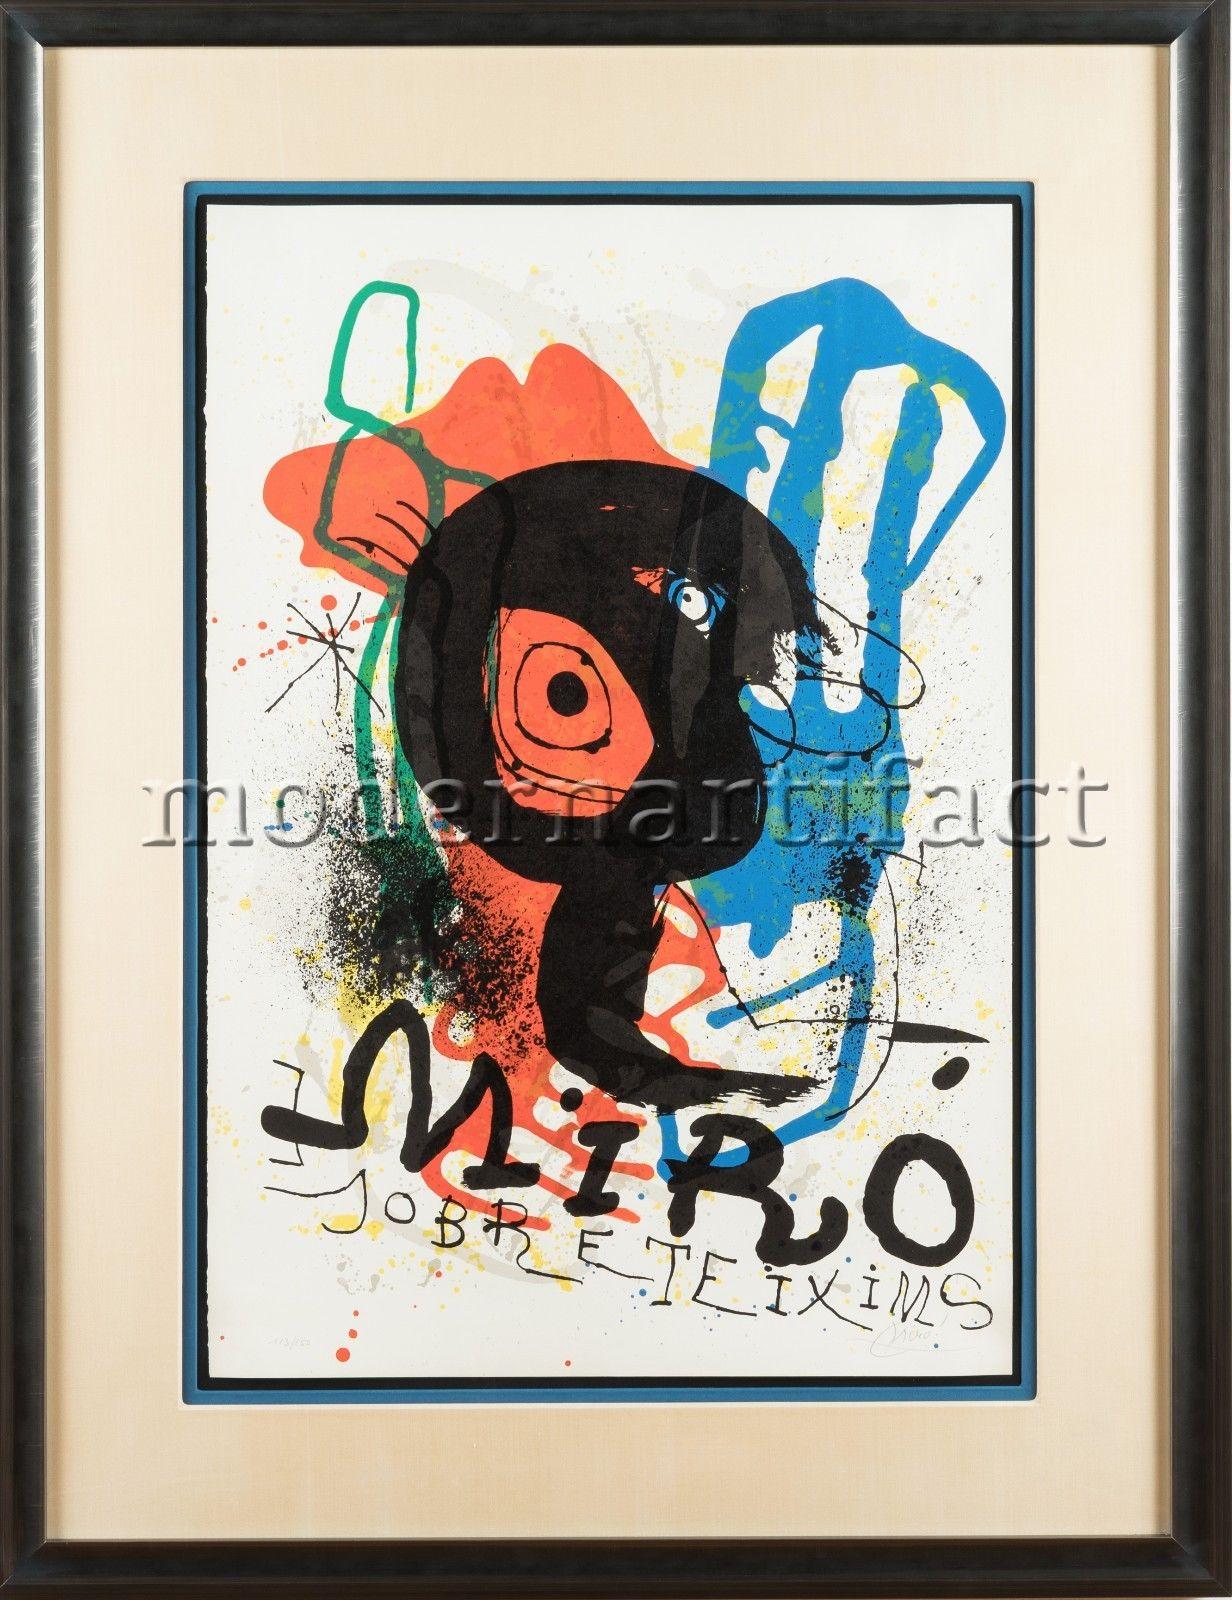 Joan Miró Abstract Print - Joan Miro "Sobreteixims Exhibition" Large Lithograph on Paper Limited Edition